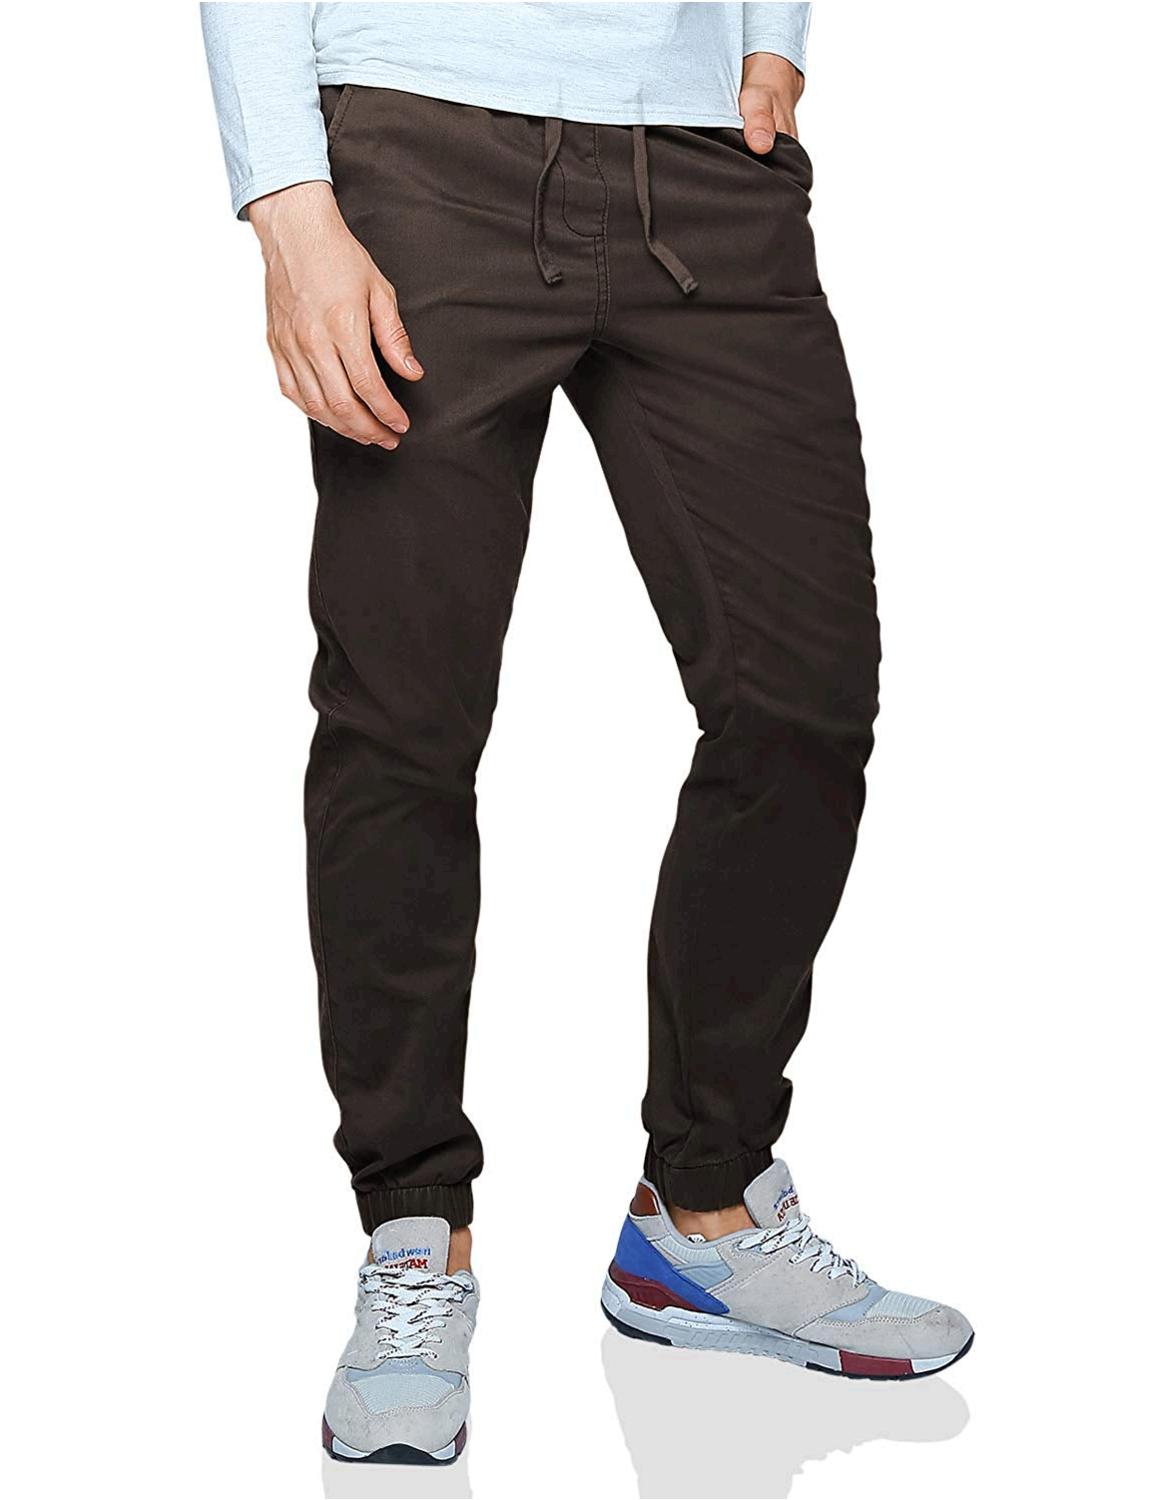 Match Men's Loose Fit Chino Washed Jogger Pant (34, 6058, 6058 Brown ...